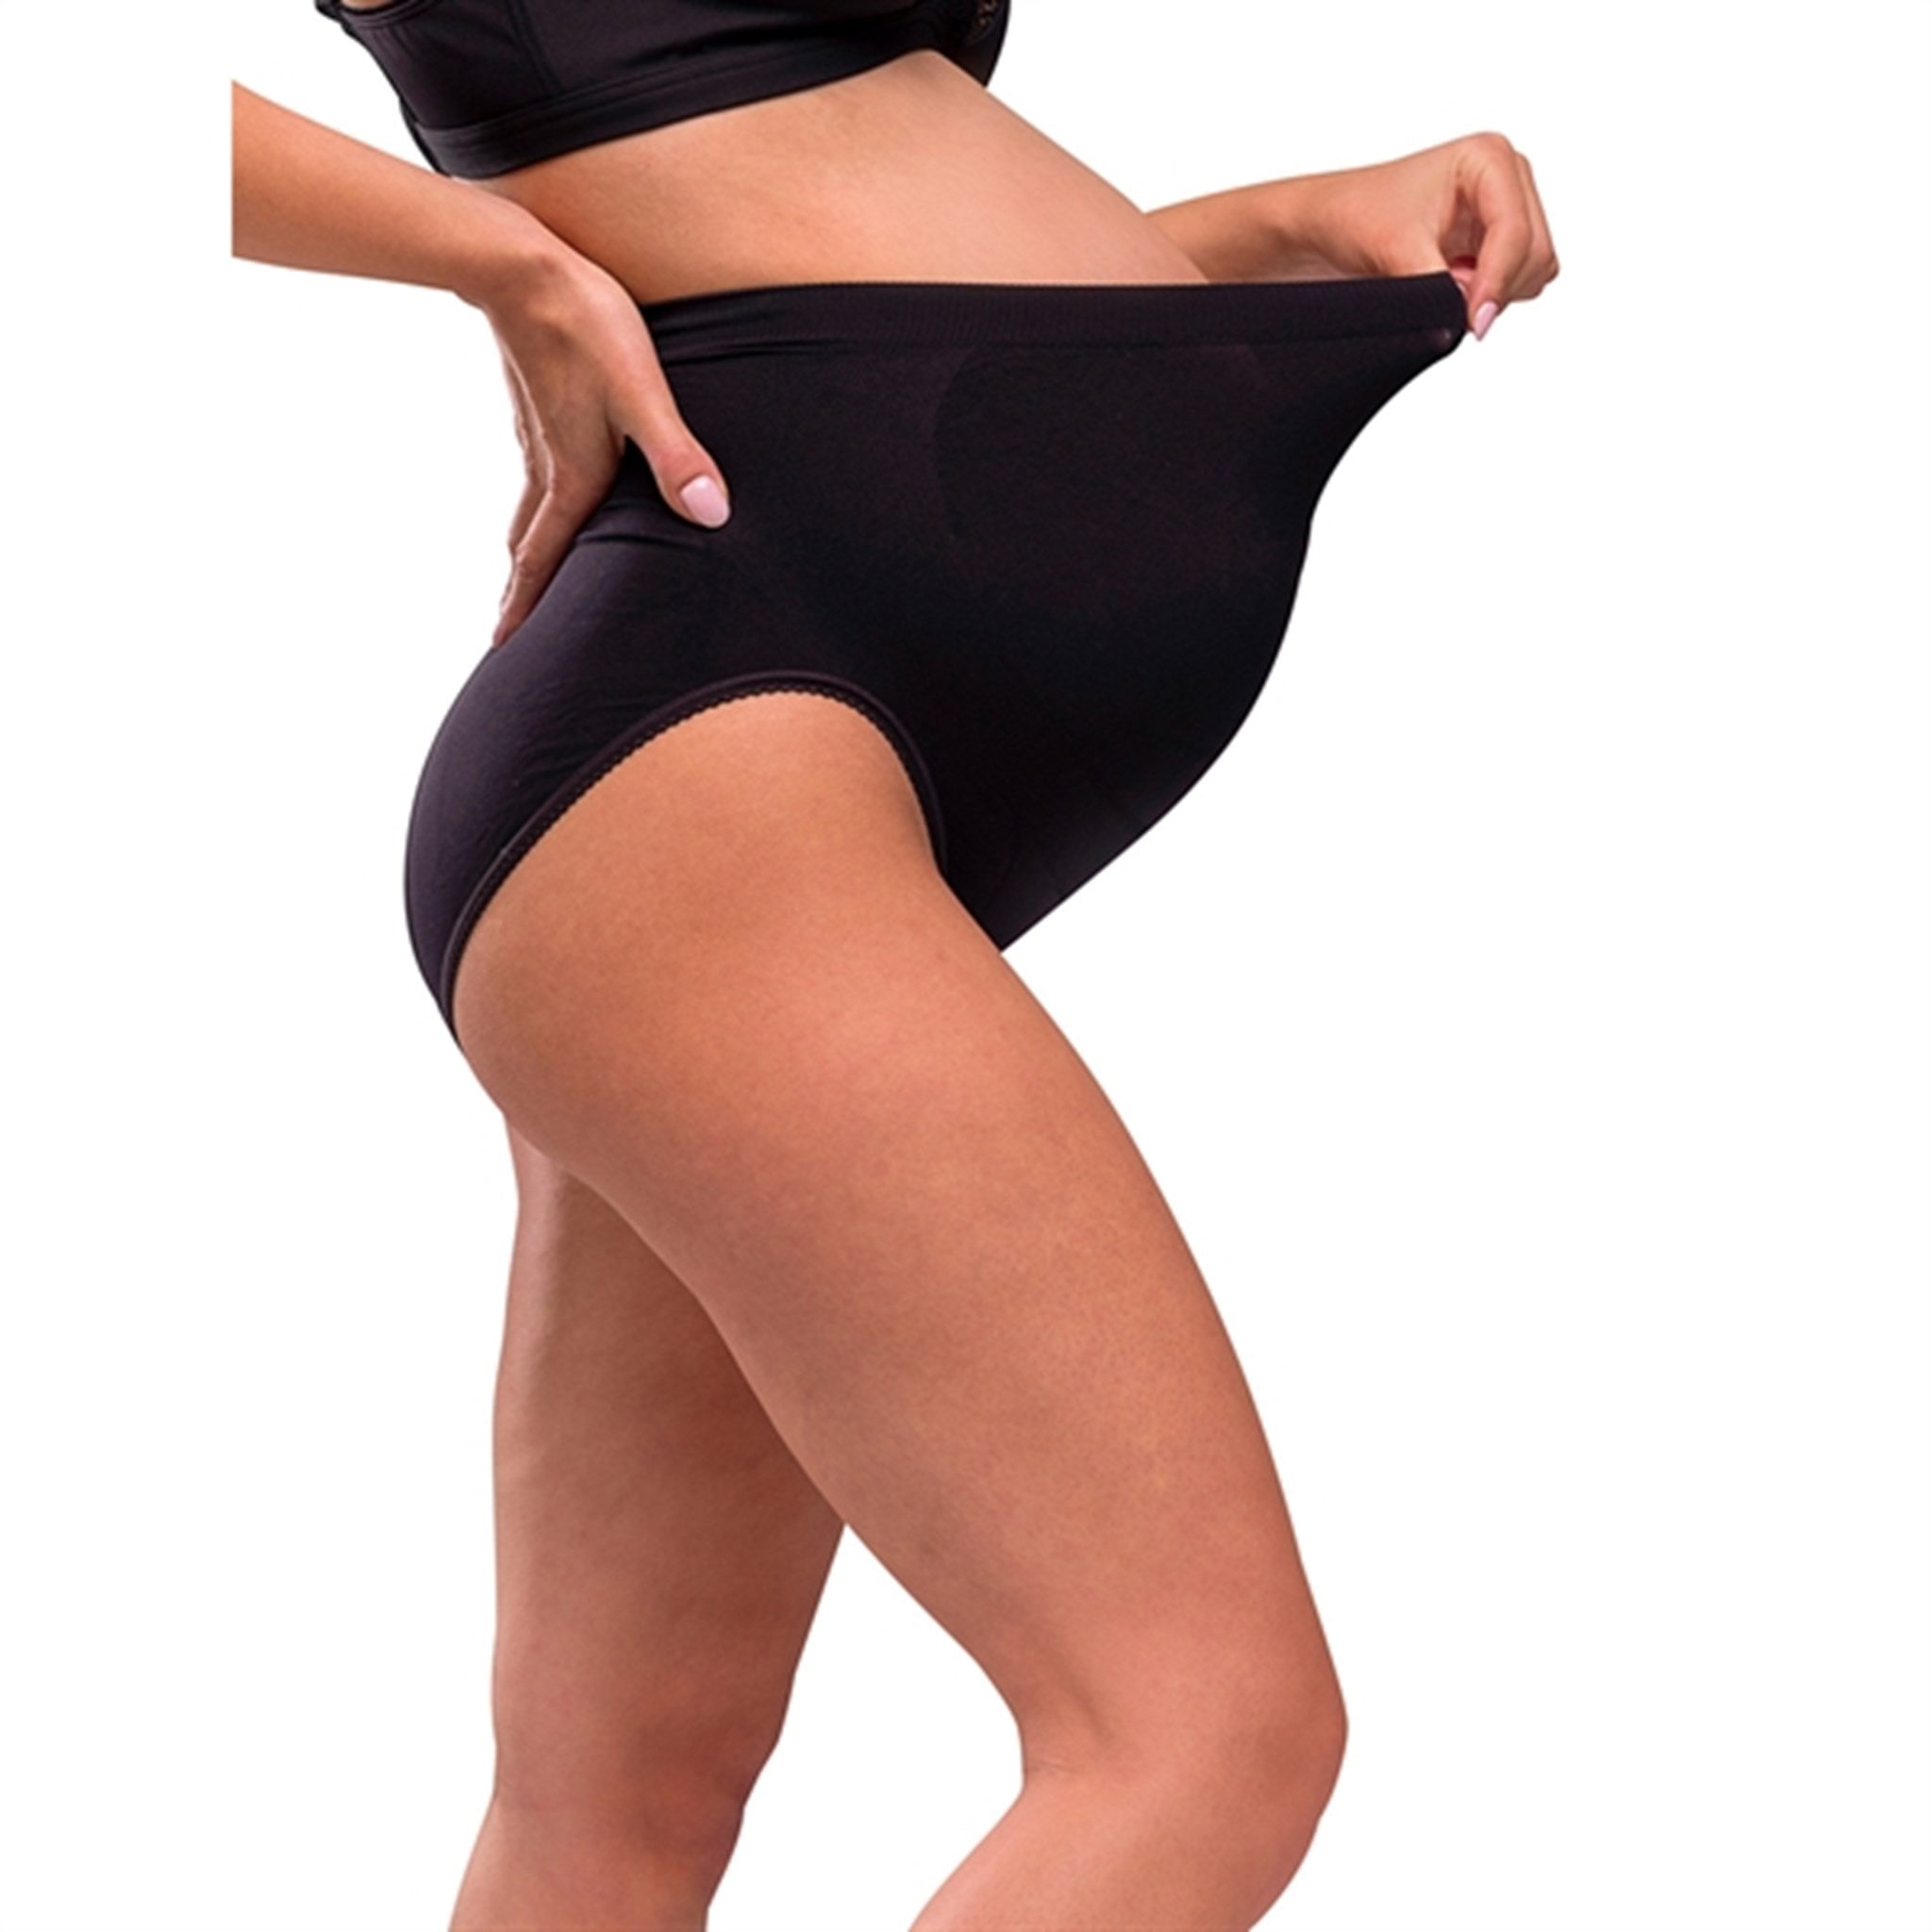 Carriwell Maternity Support Panty Black 9